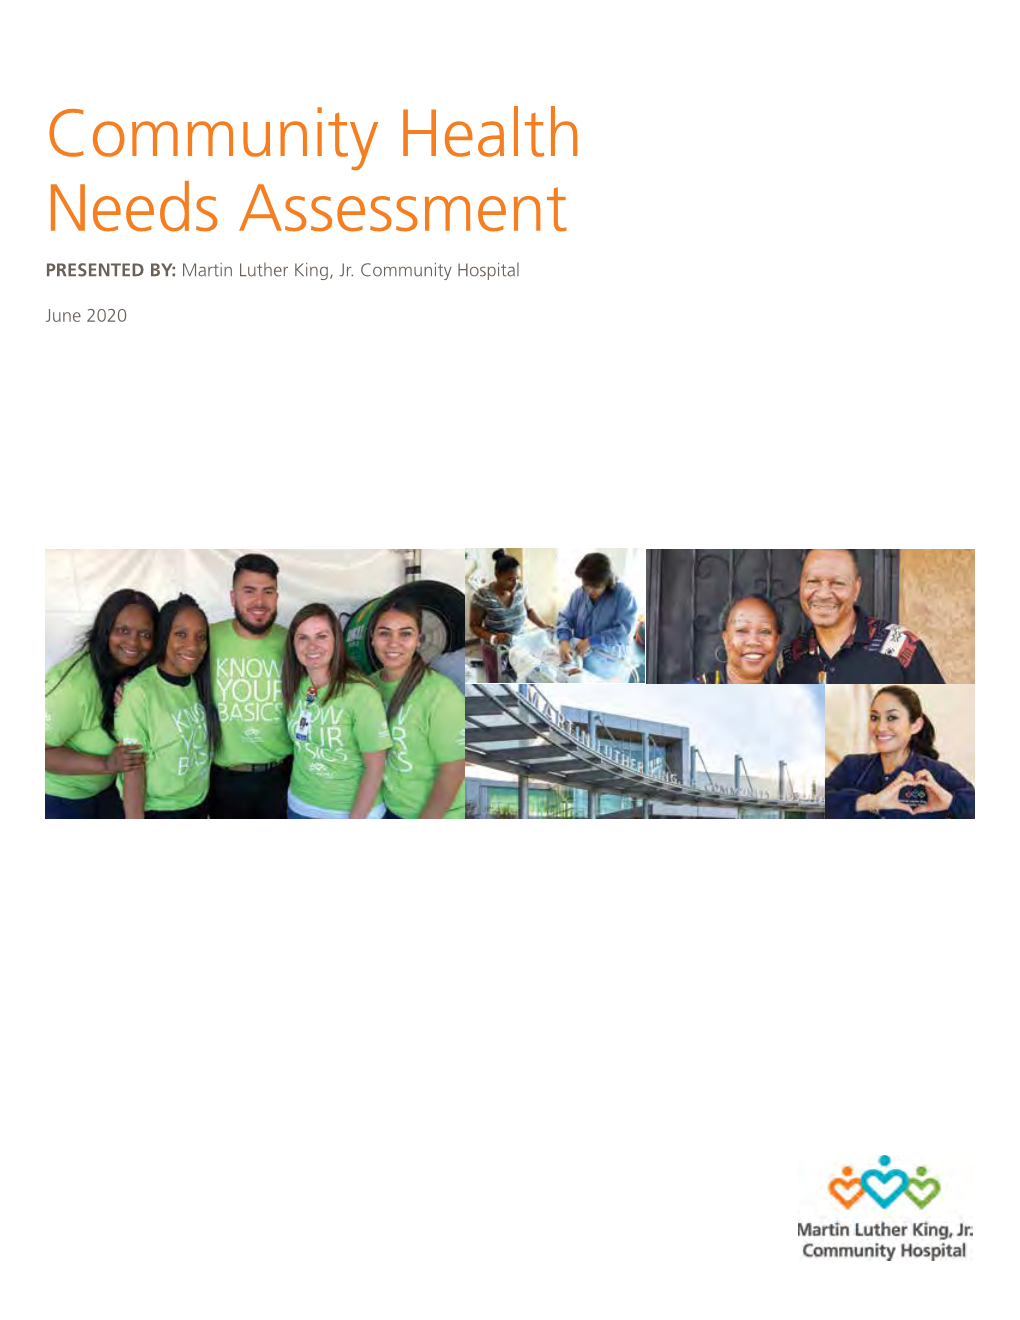 Community Health Needs Assessment PRESENTED BY: Martin Luther King, Jr